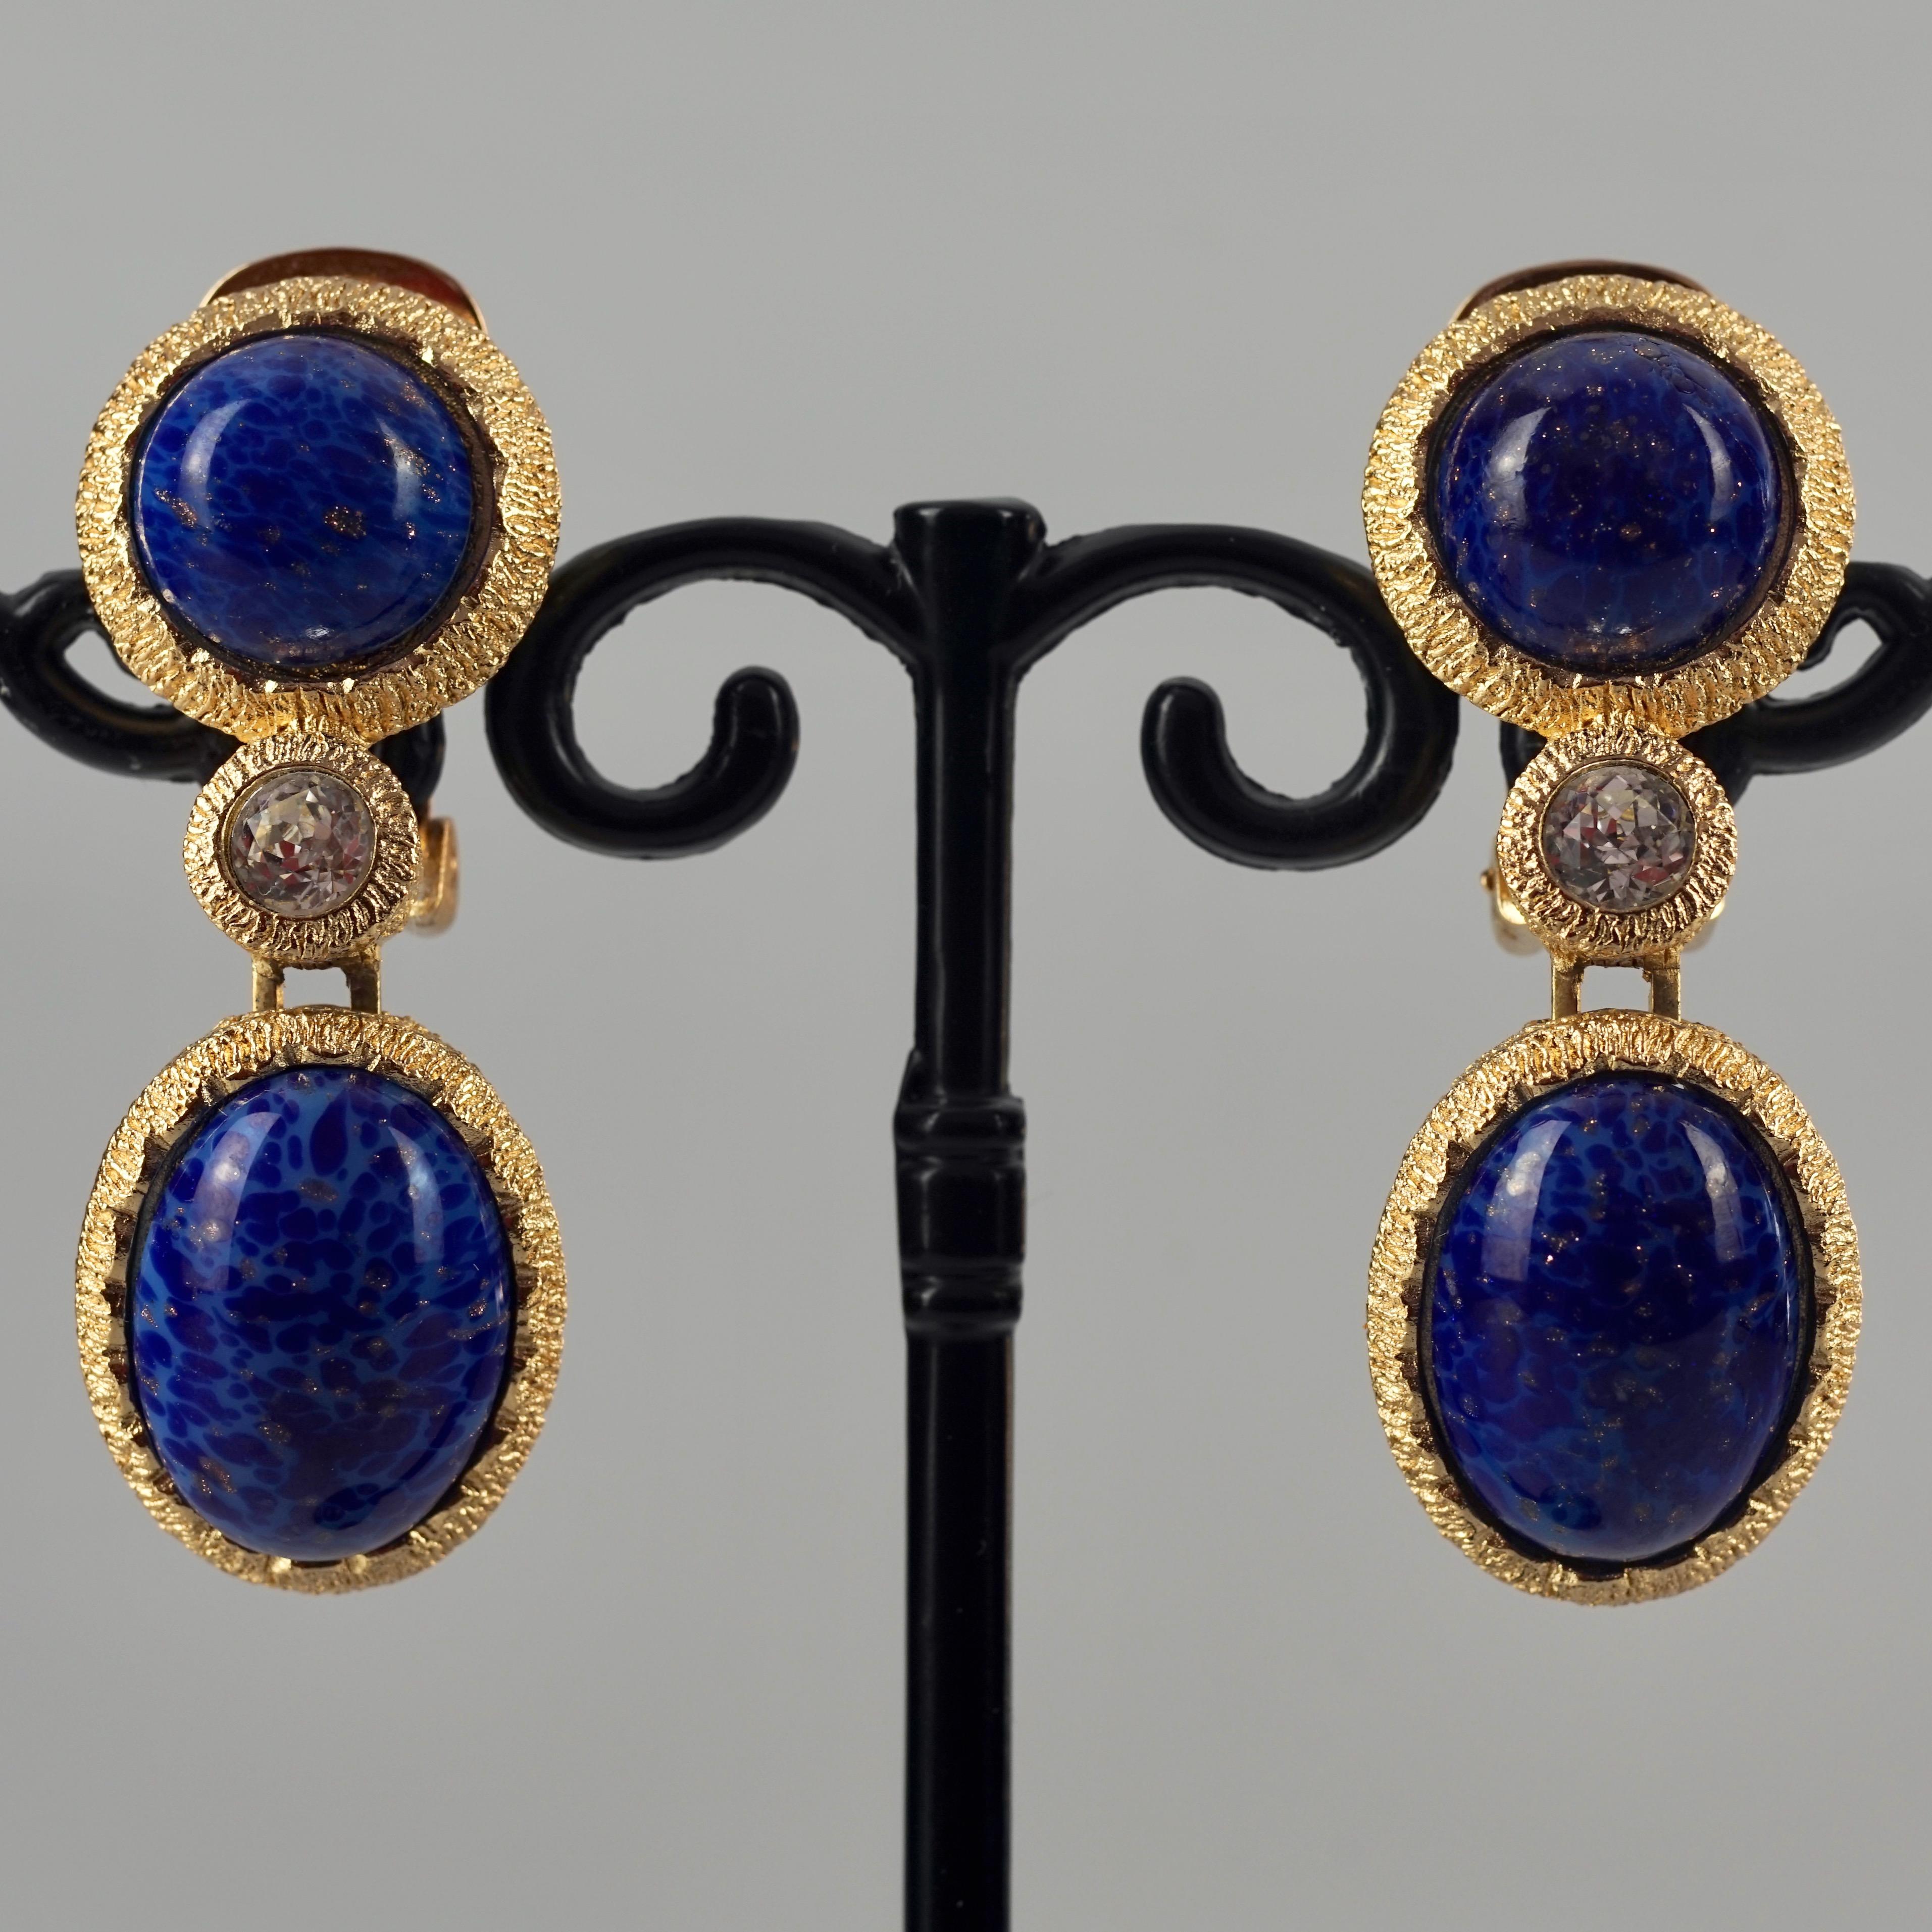 Vintage CHRISTIAN DIOR Lapis Lazuli Gilt Dangling Earrings

Measurements:
Height: 1.77 inches (4.5 cm)
Width: 0.70 inch (1.8 cm)
Weight per Earring: 17 grams

Features:
- 100% Authentic CHRISTIAN DIOR.
- Textured gilt dangling earrings with lapis